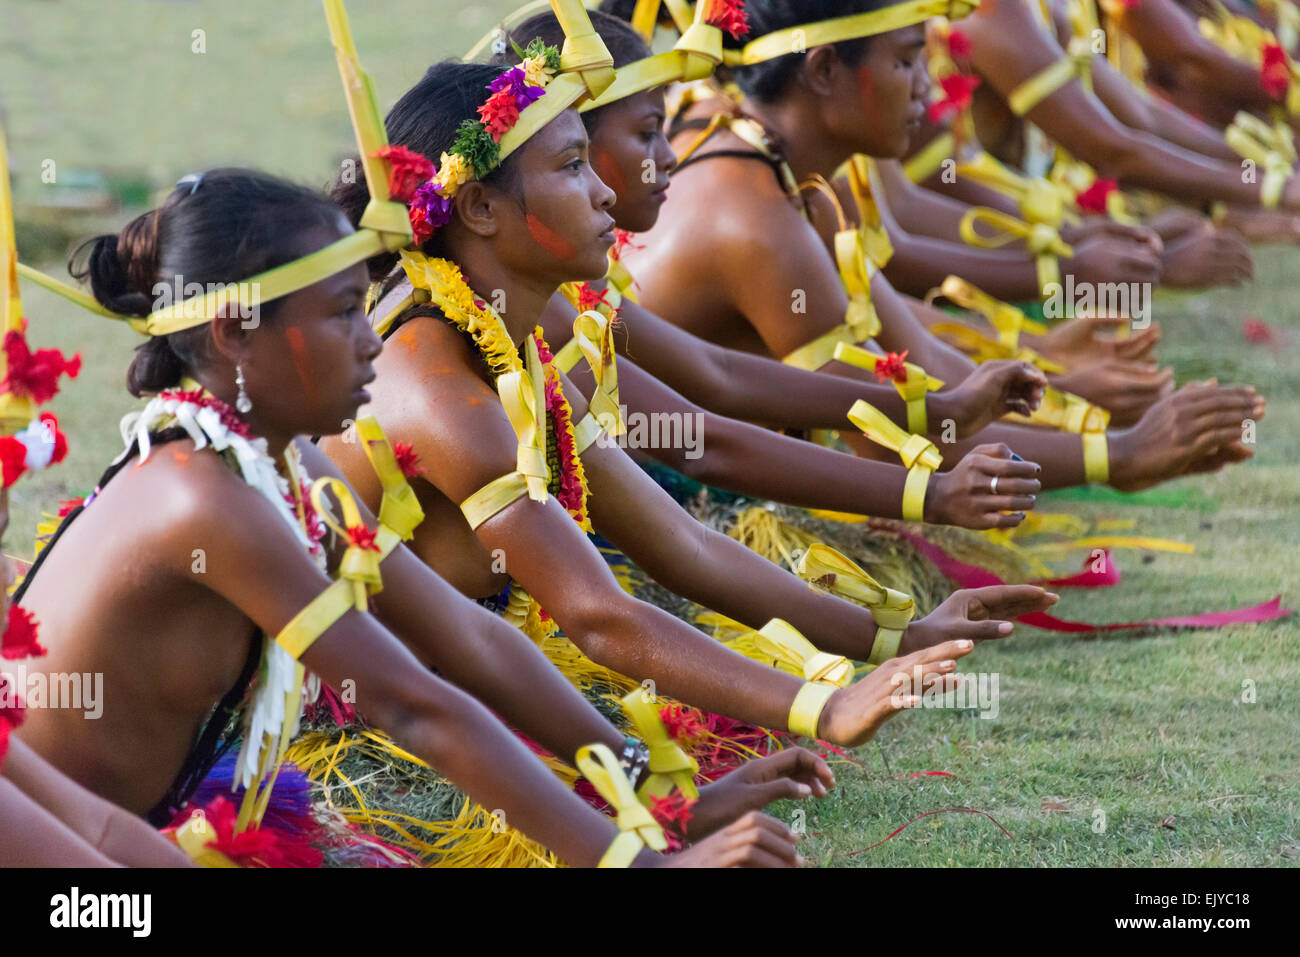 Yapese women in traditional clothing singing and dancing at Yap Day Festival, Yap Island, Federated States of Micronesia Stock Photo